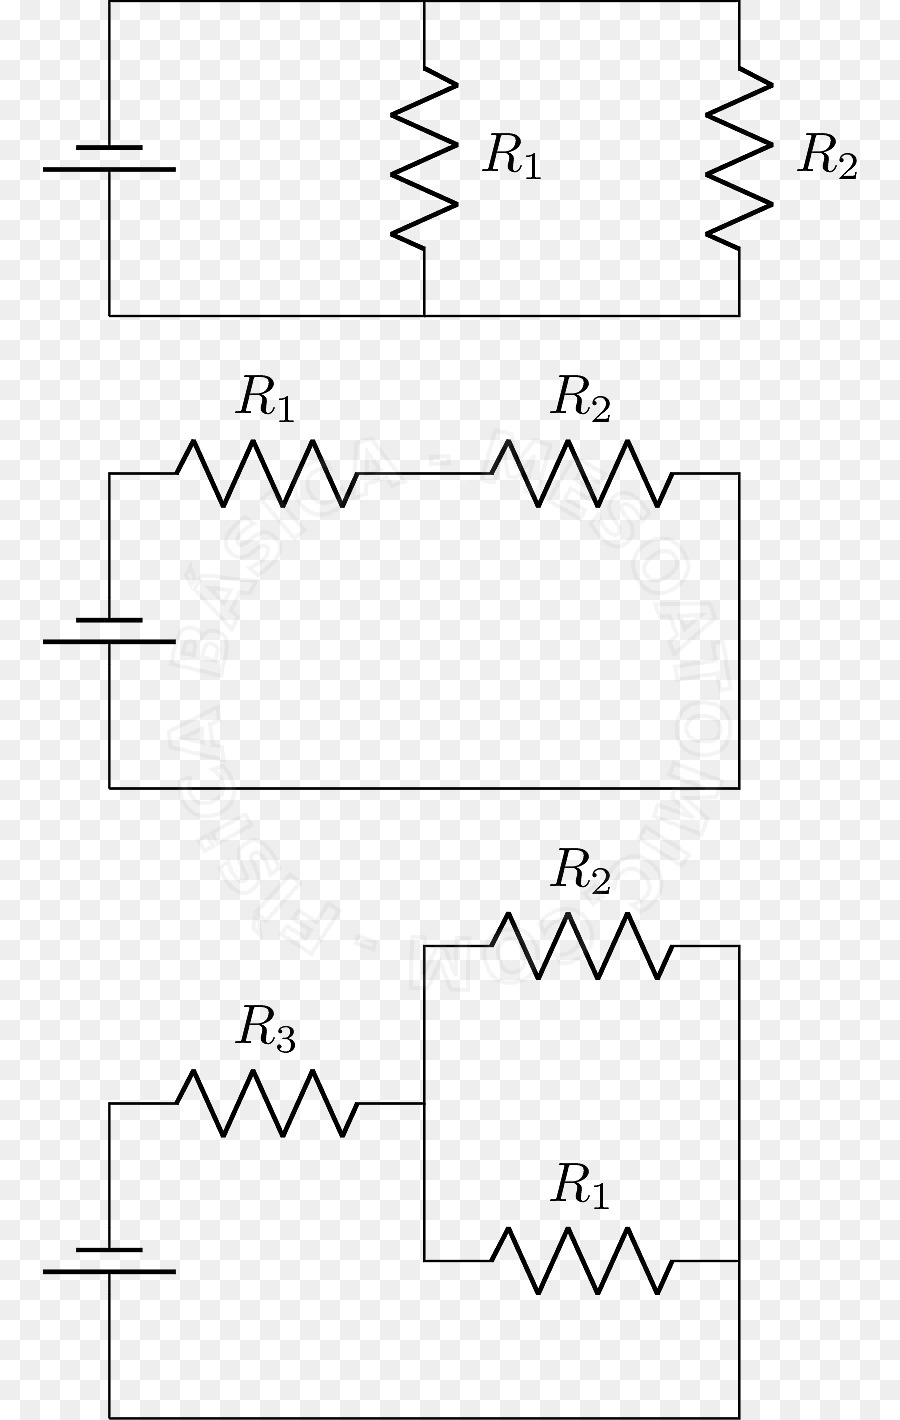 Resistor Series and parallel circuits Electrical network Voluntary association parallelschaltung - Widerstand